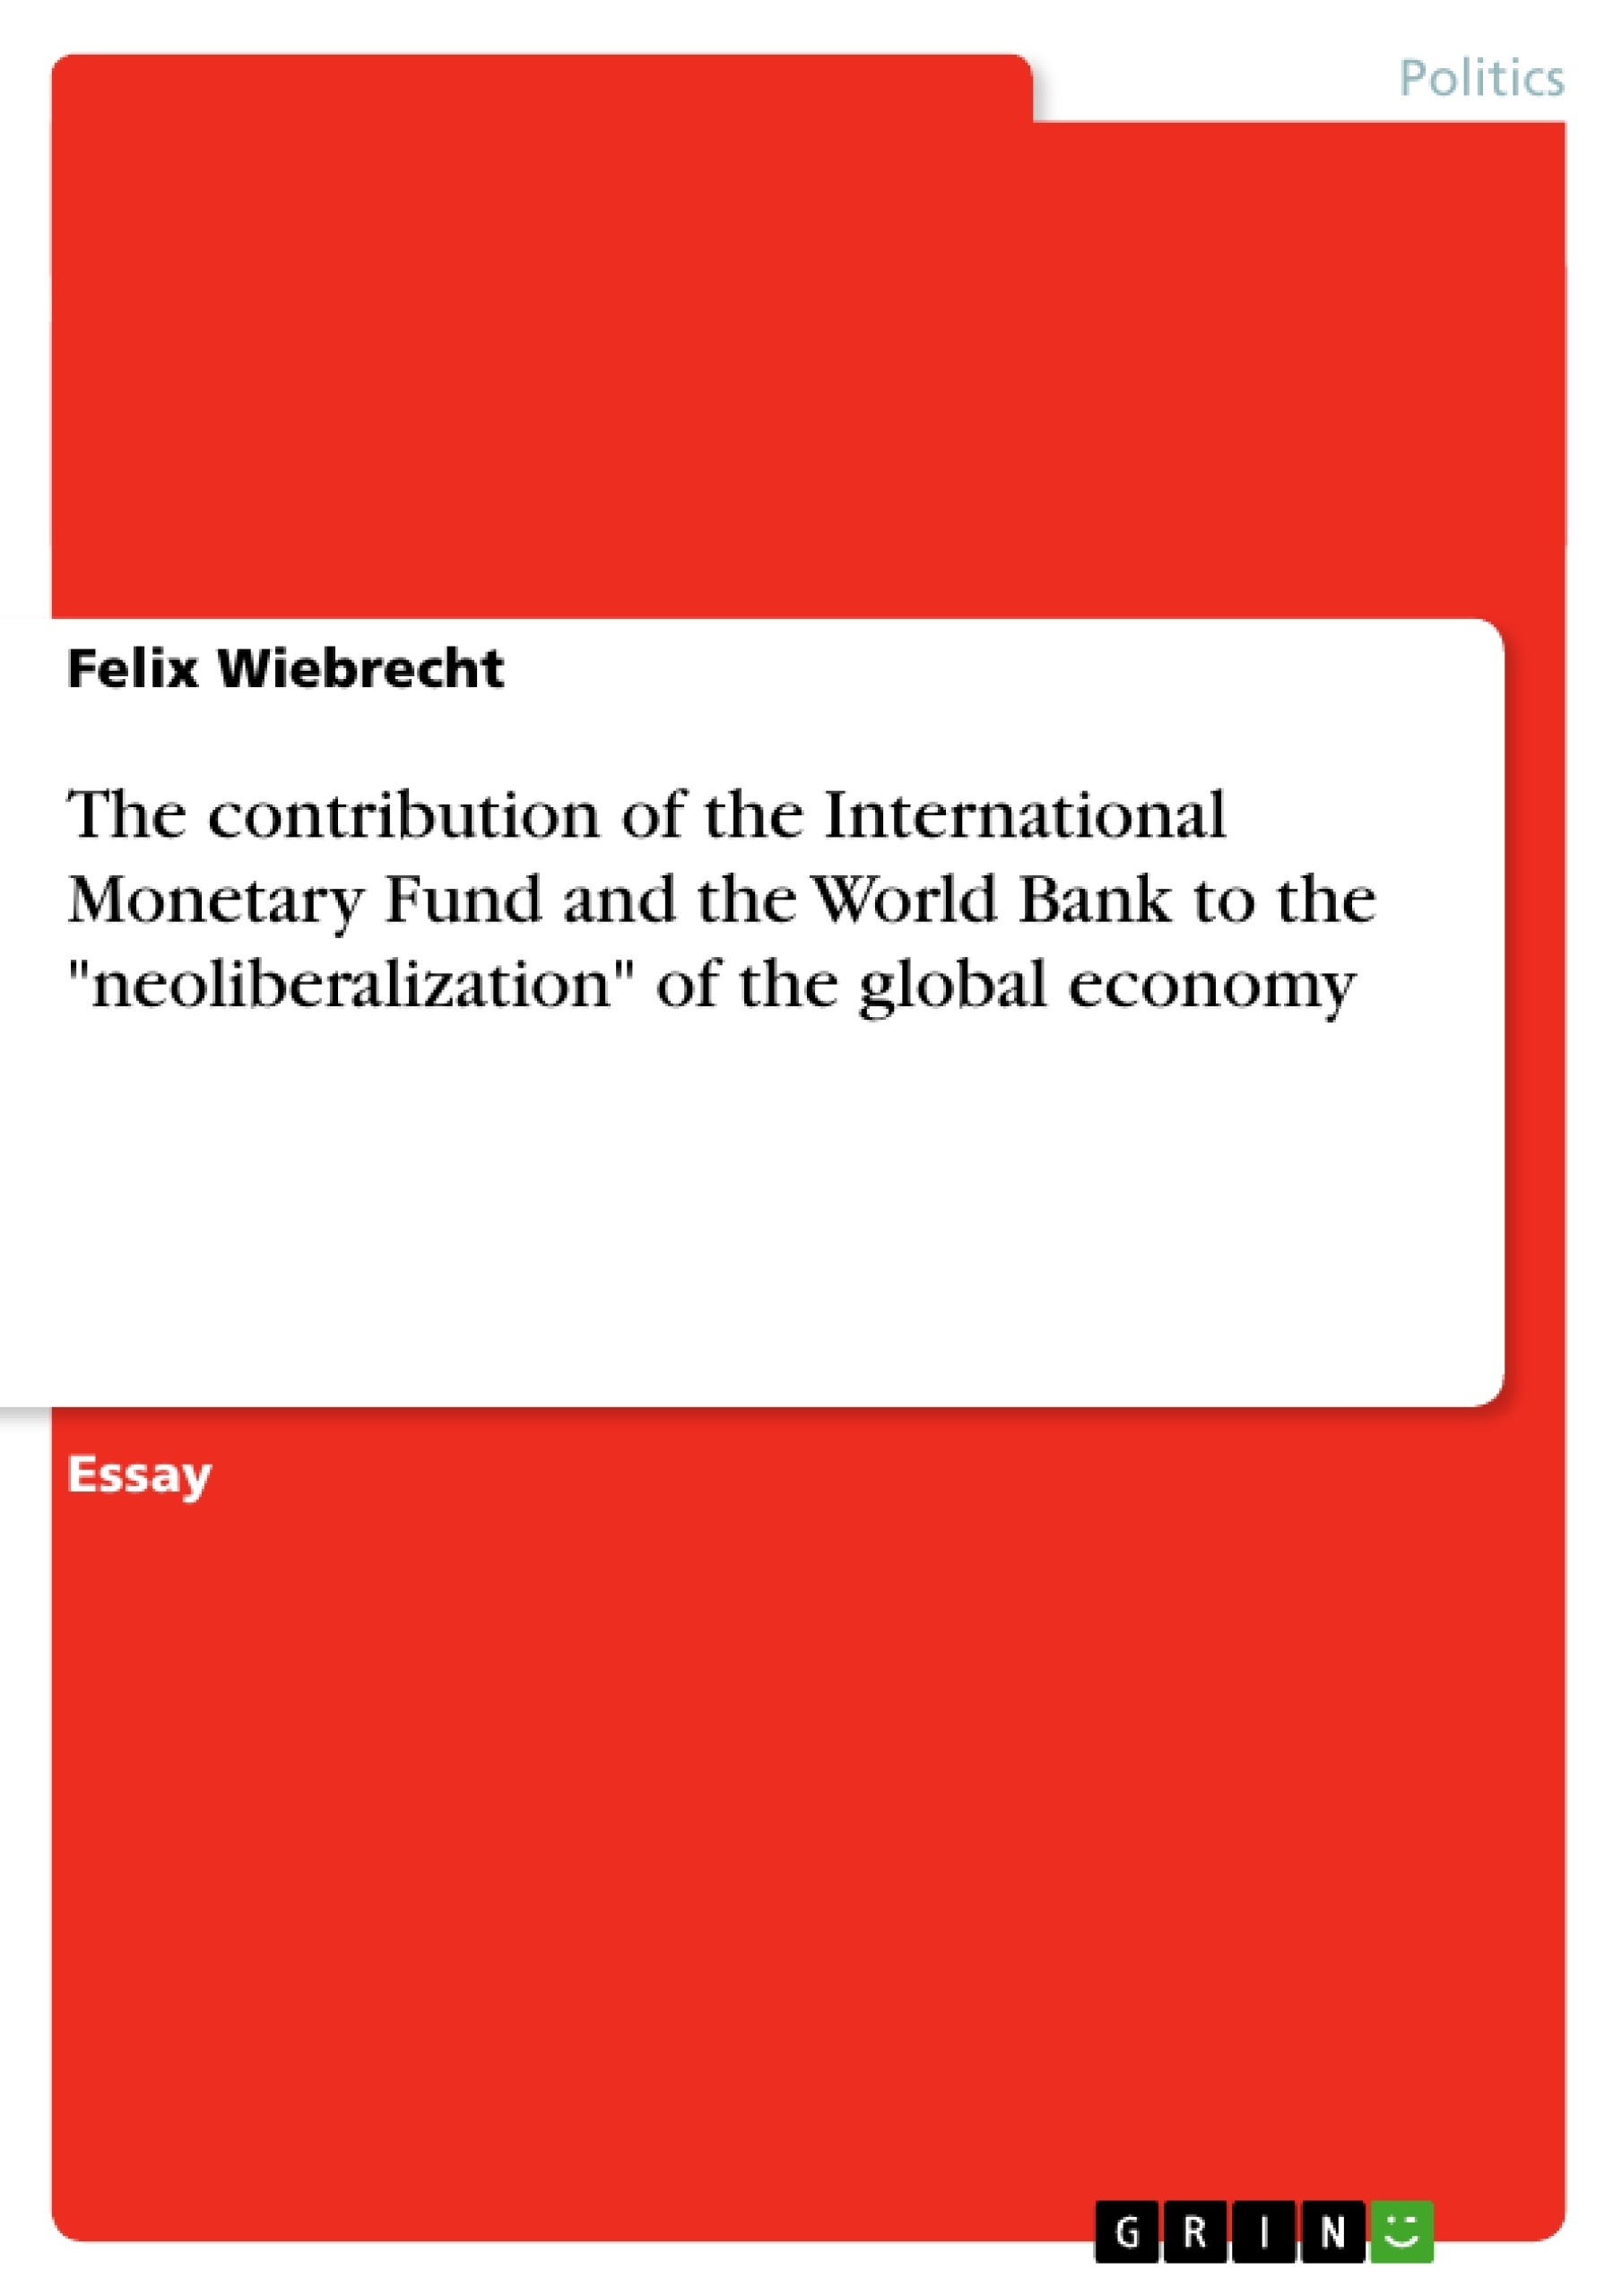 Título: The contribution of the International Monetary Fund and the World Bank to the "neoliberalization" of the global economy